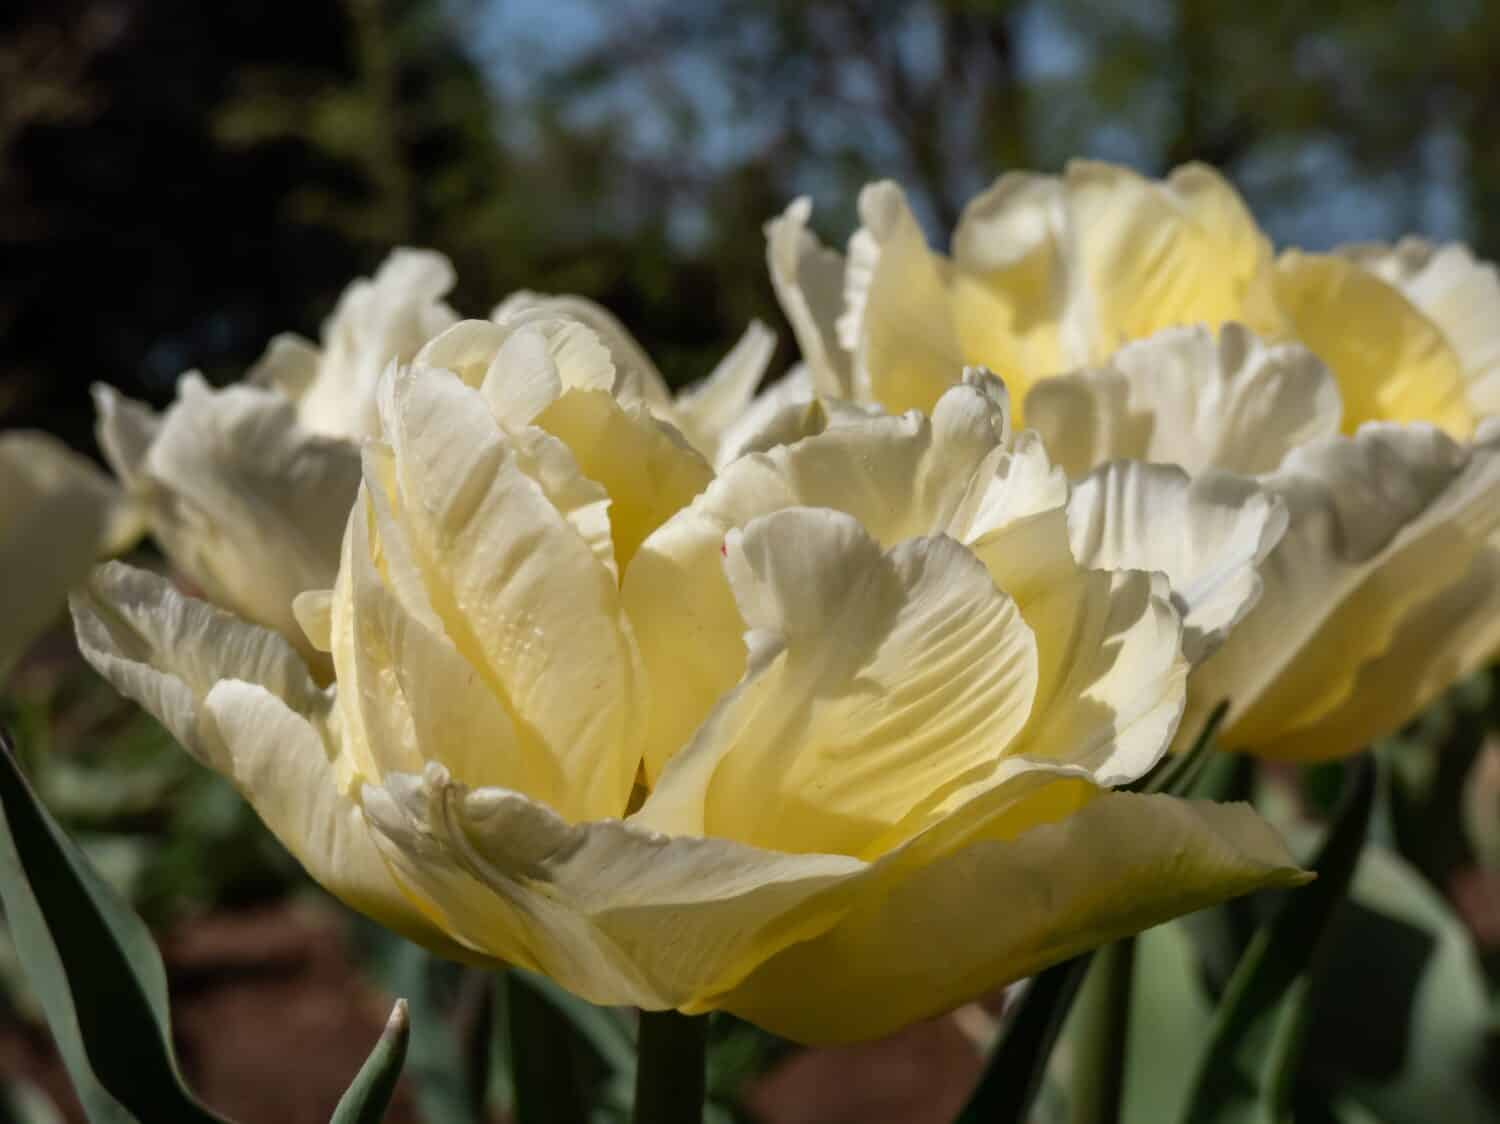 Double early tulip 'Verona' blooming with large, soft, creamy yellow blossoms with double row of feathery petals delicately coloured with white in the garden